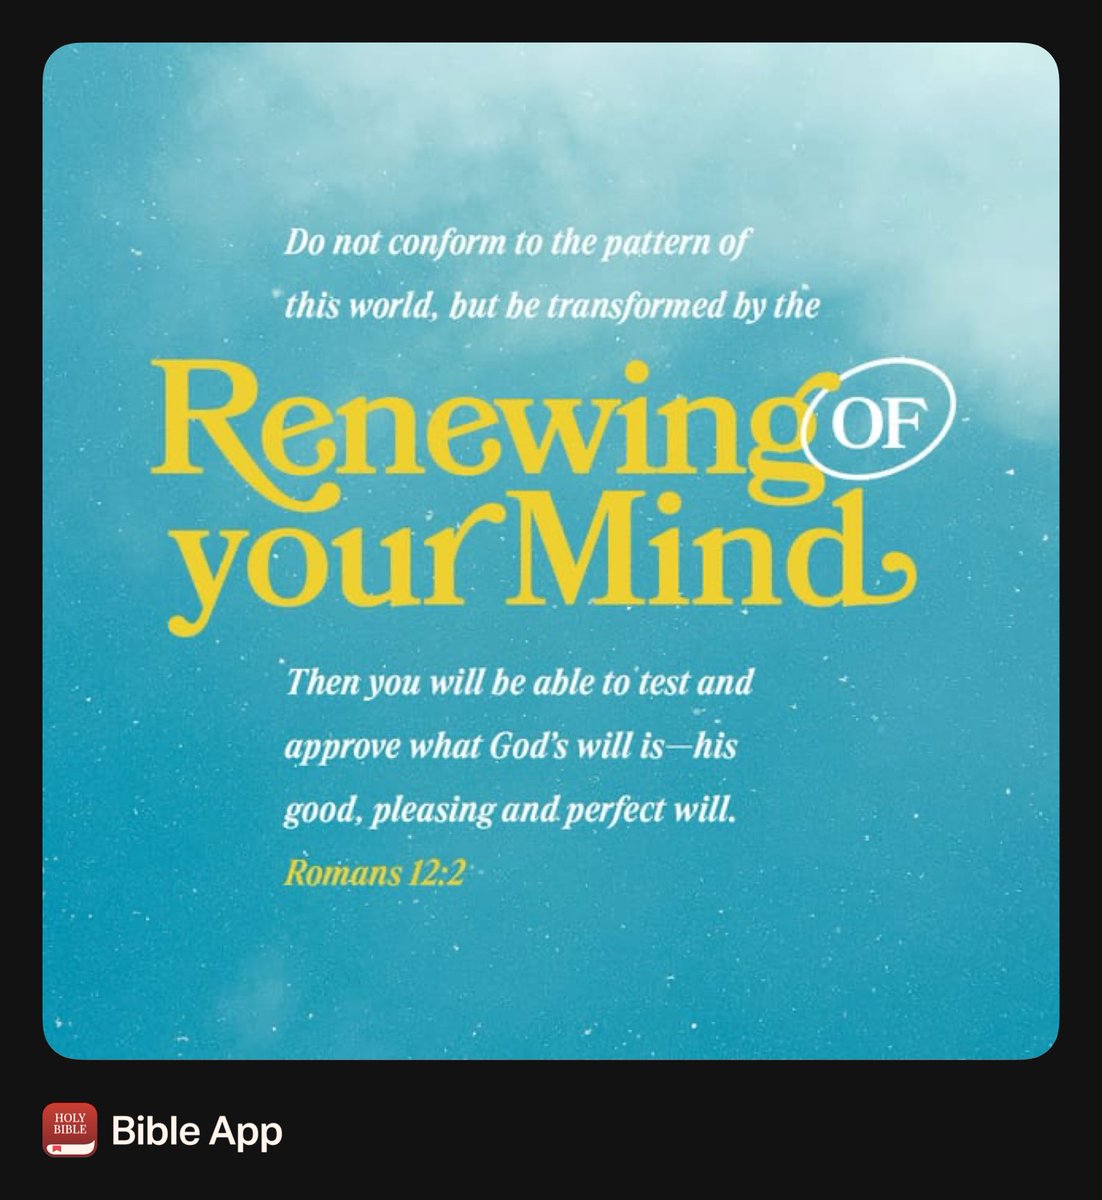 2 Do not conform to the pattern of this world, but be transformed by the renewing of your mind. Then you will be able to test and approve what God’s will is—his good, pleasing and perfect will. (Romans 12:2 NIV)